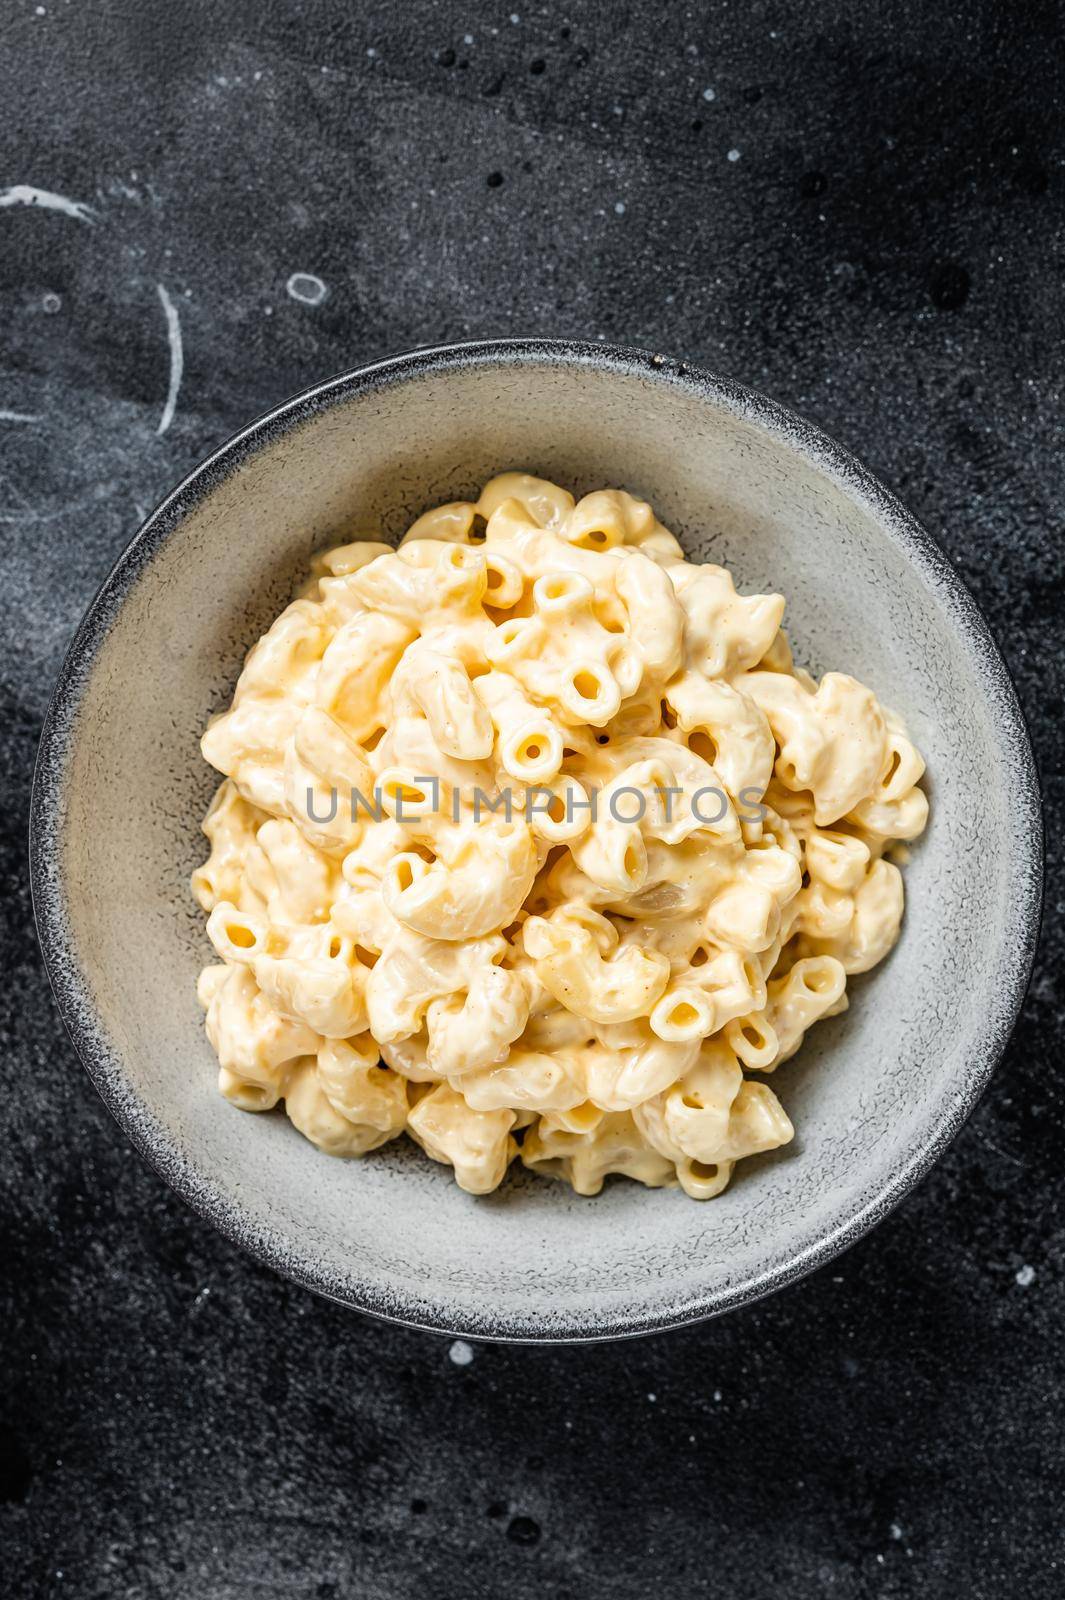 Mac and cheese american macaroni pasta with cheesy Cheddar sauce. Black background. Top view.